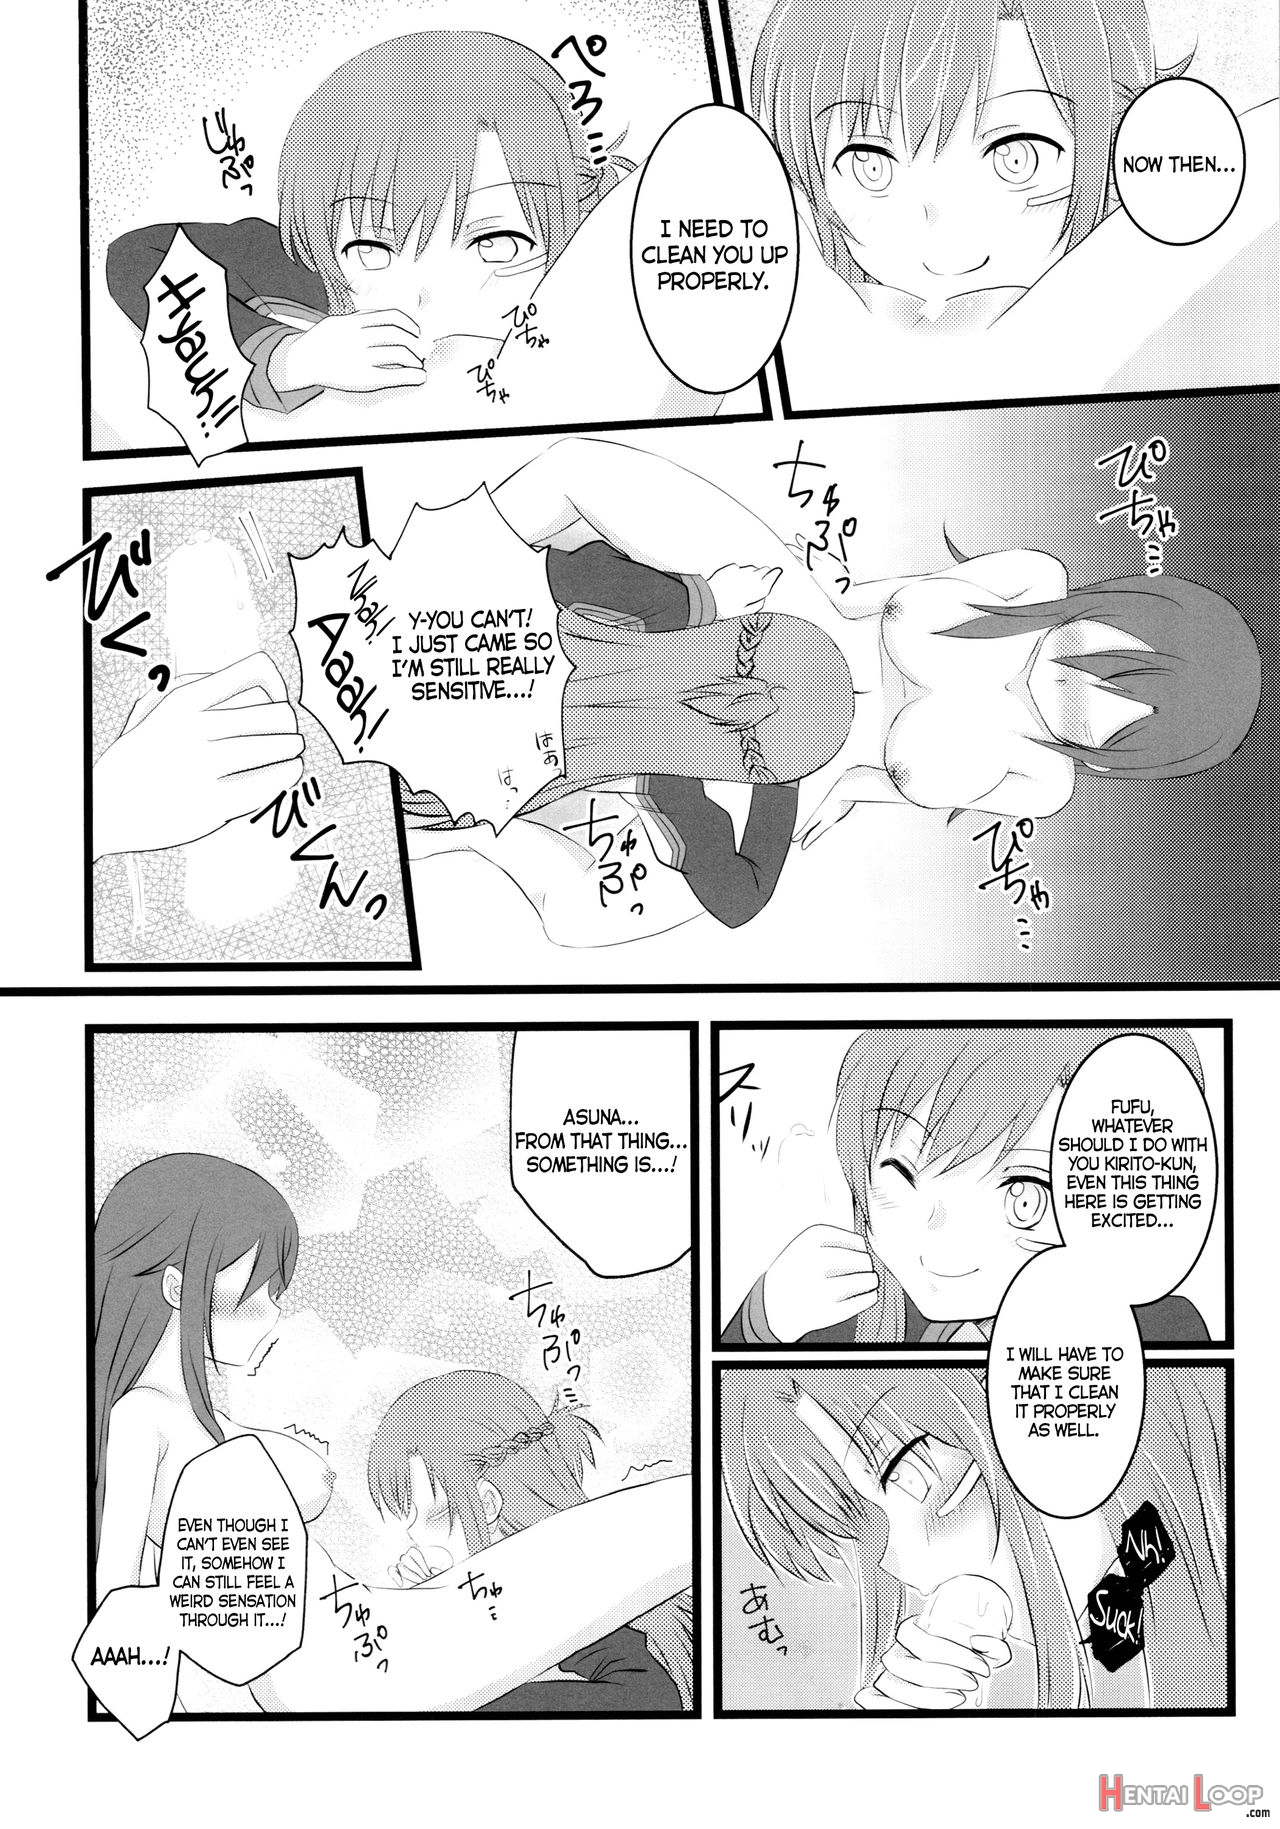 Let's Play With Kiriko-chan! 4 page 9